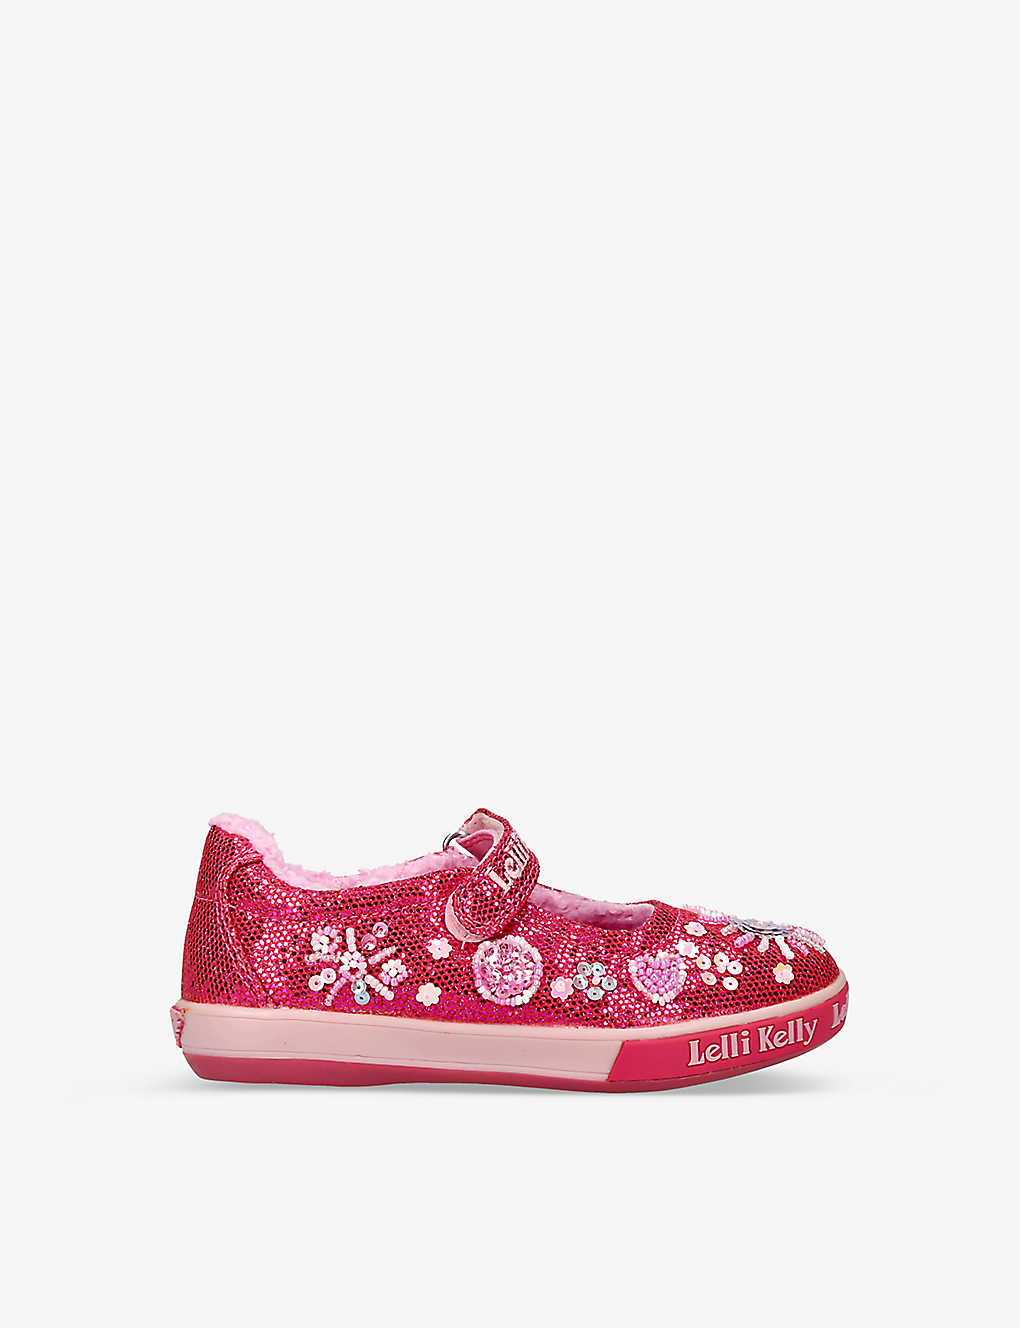 LELLI KELLY DAFNE DOLLY BEAD AND SEQUIN-EMBELLISHED WOVEN LOW-TOP TRAINERS 2-7 YEARS